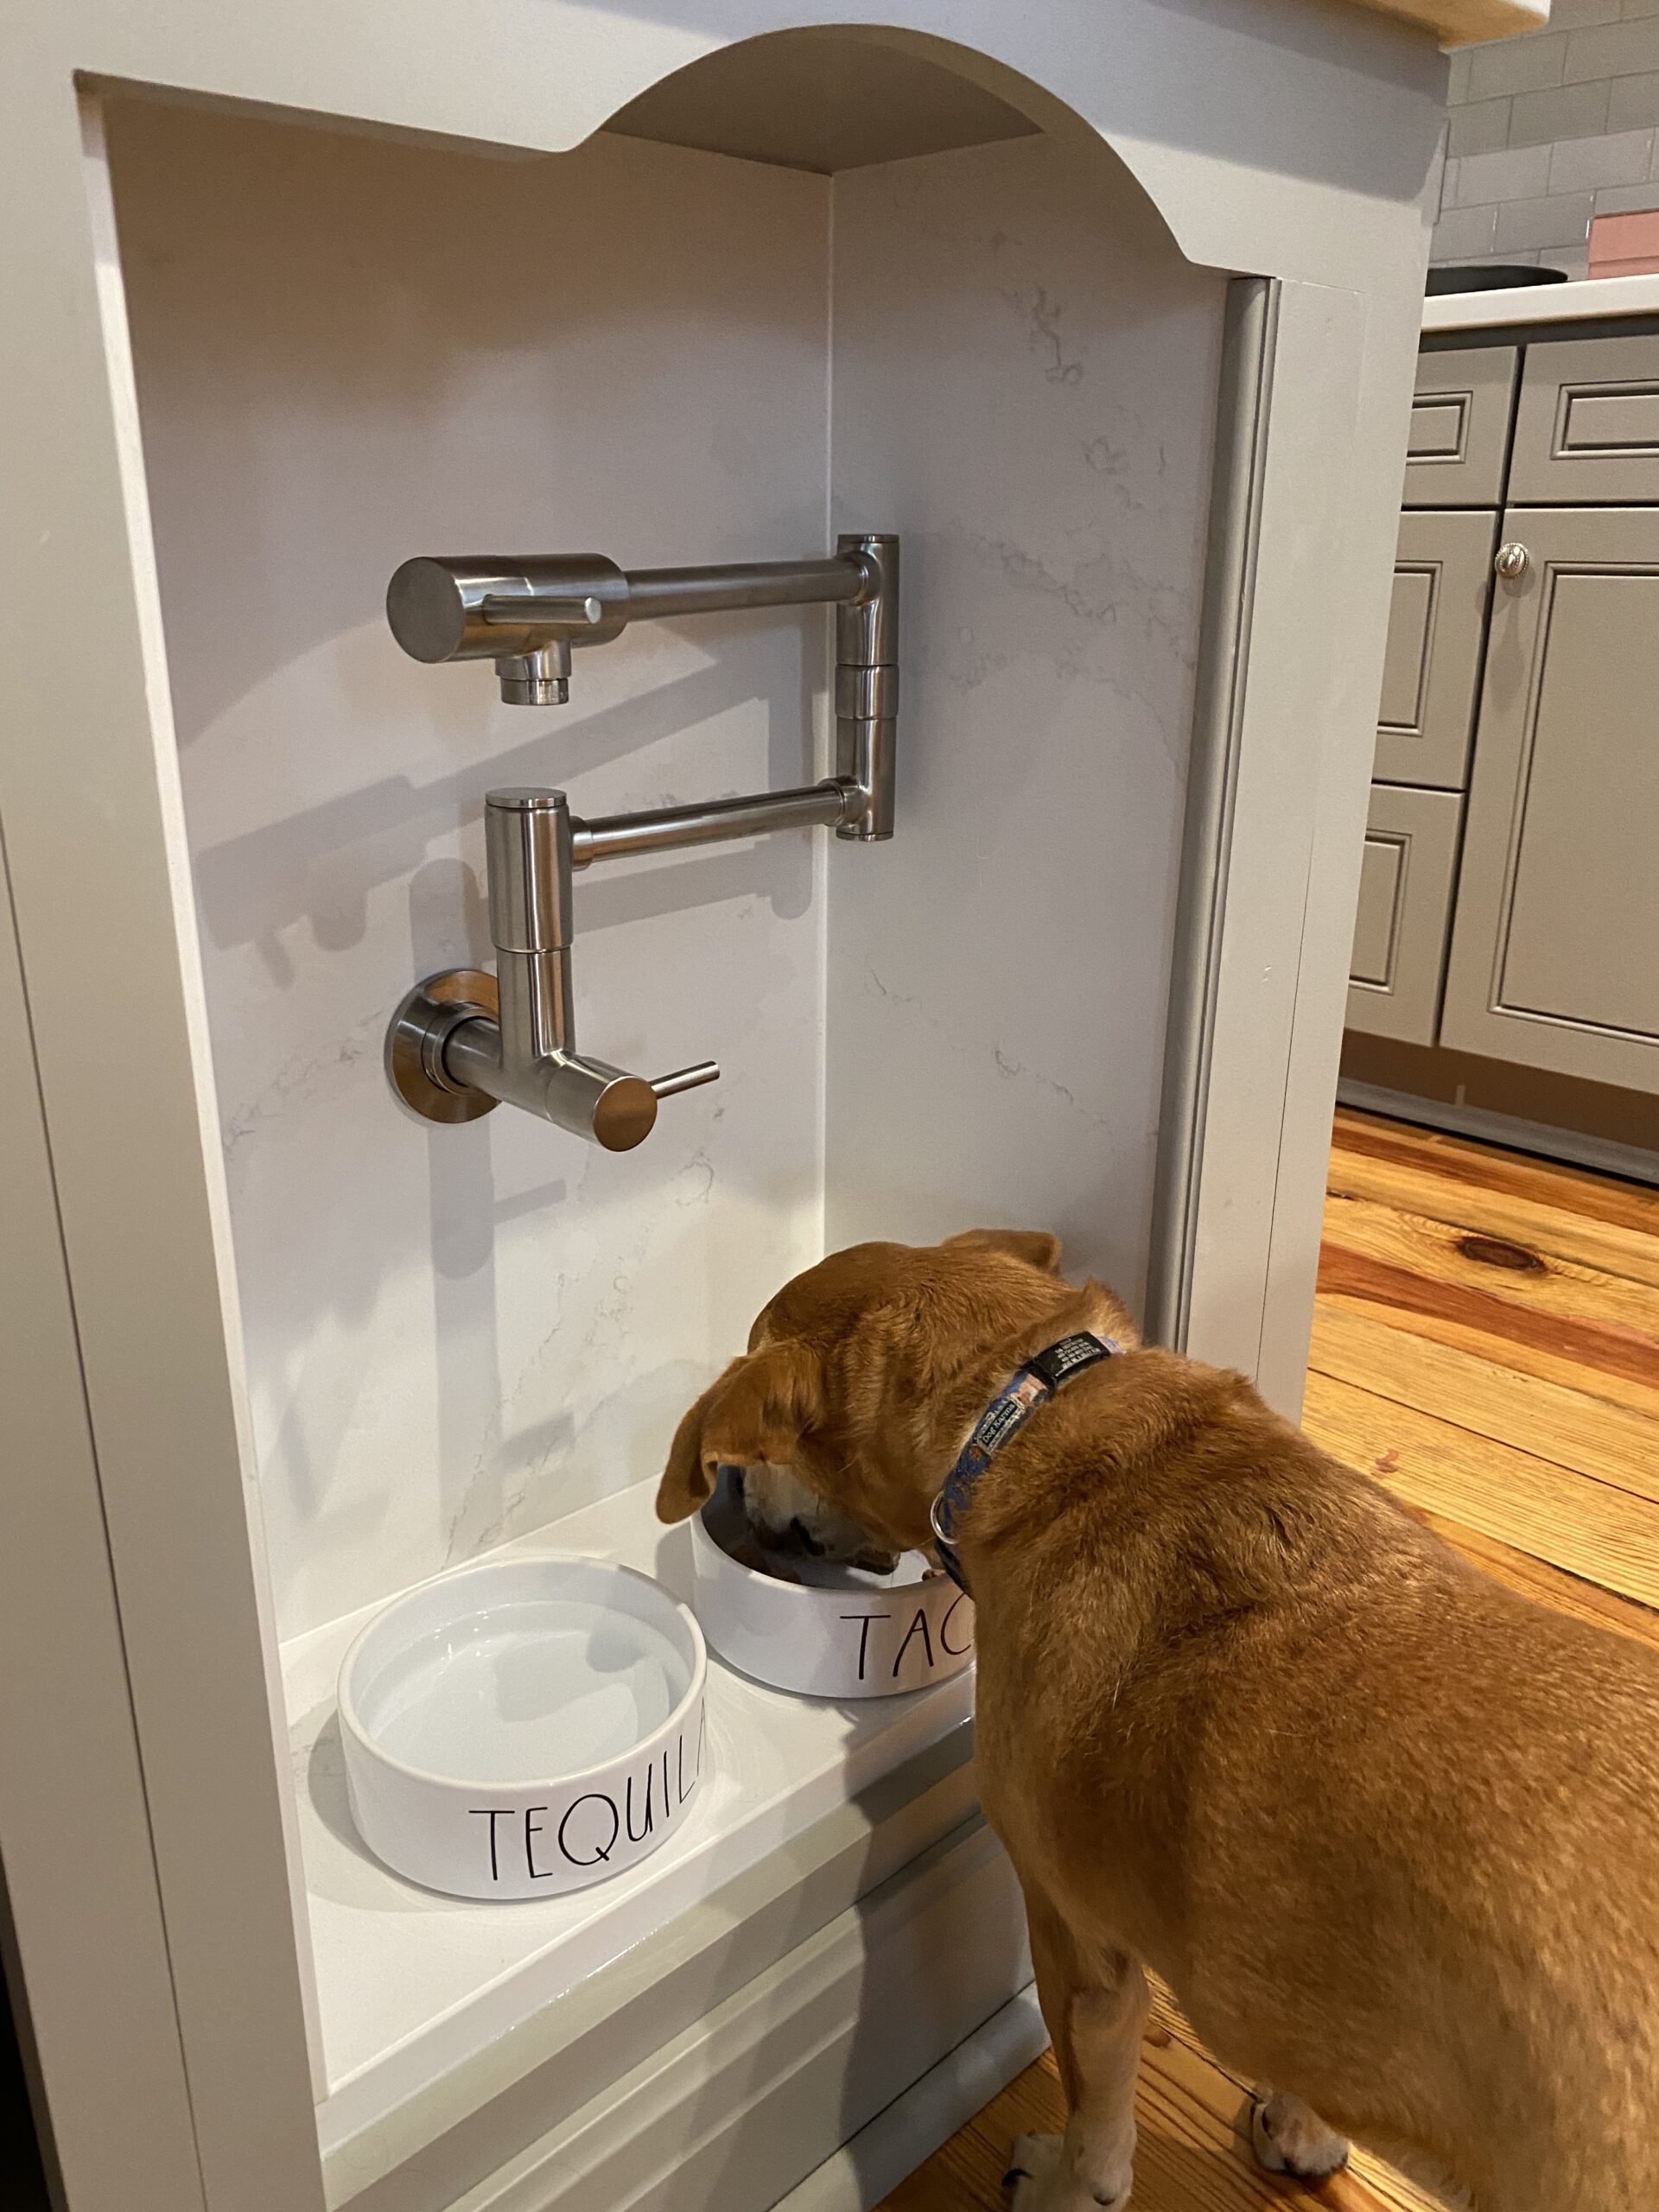 Built-in dog bowl area